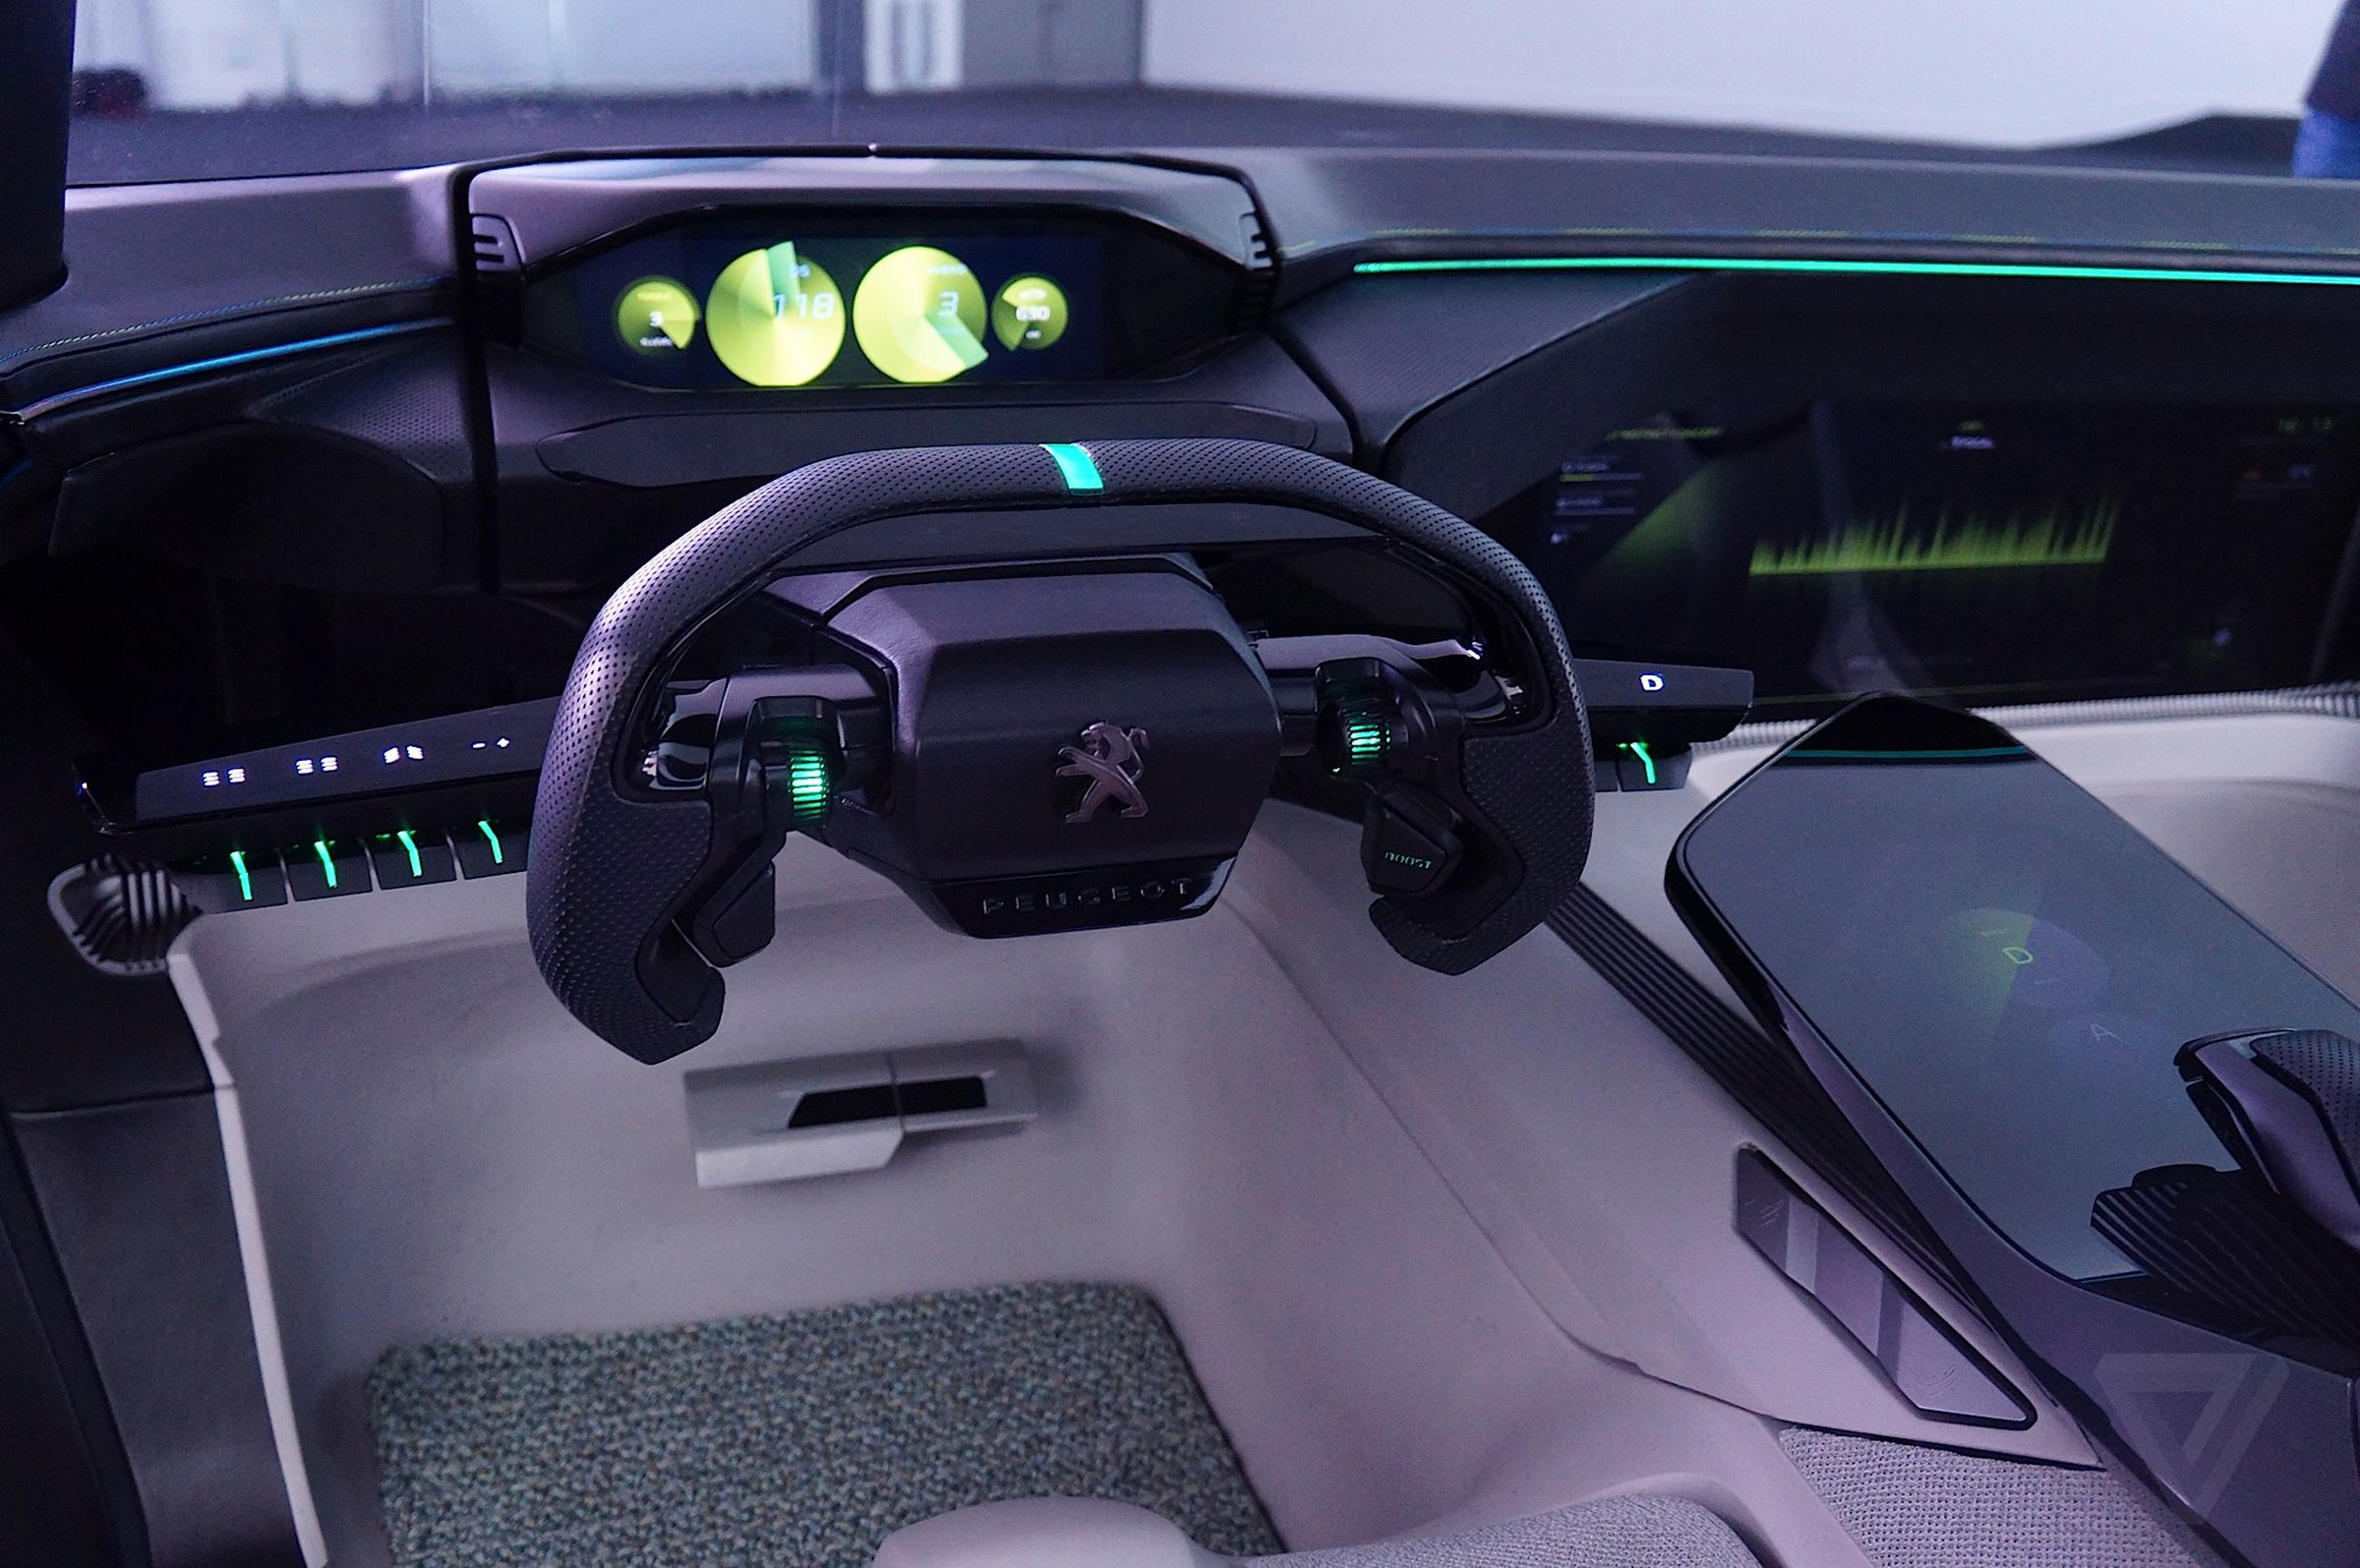 Peugeot has pared down its i-Cockpit interface for the Instinct, though it retains its retractable steering wheel and gas pedal. 